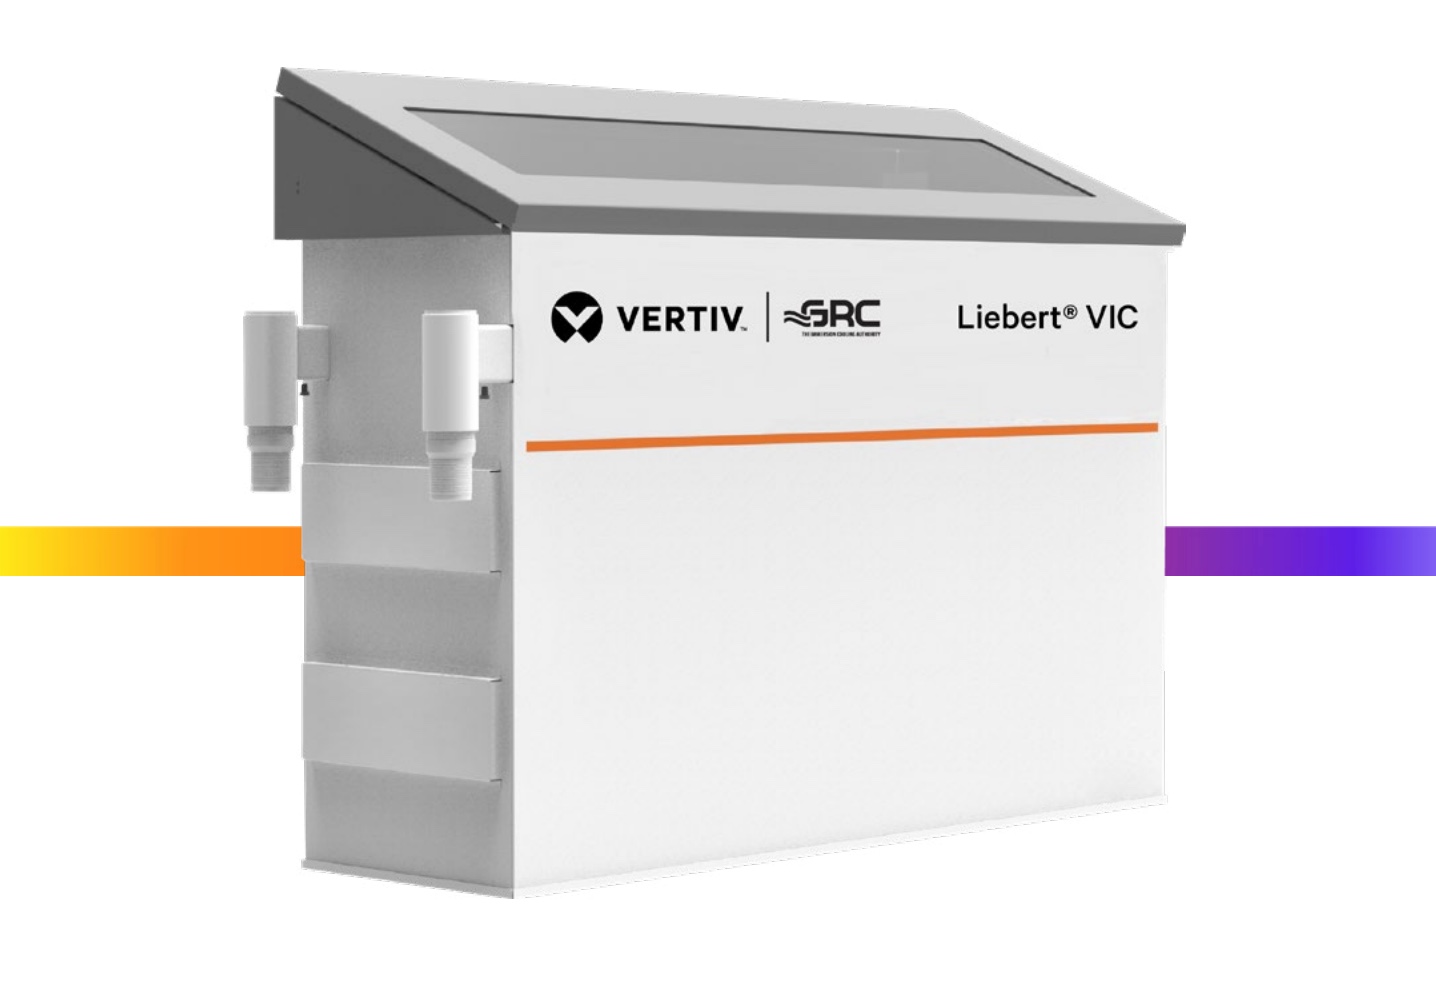 Vertiv Partners with GRC to Offer Highly Efficient Liquid Cooling Solution for High-Density Data Centers and Edge Applications